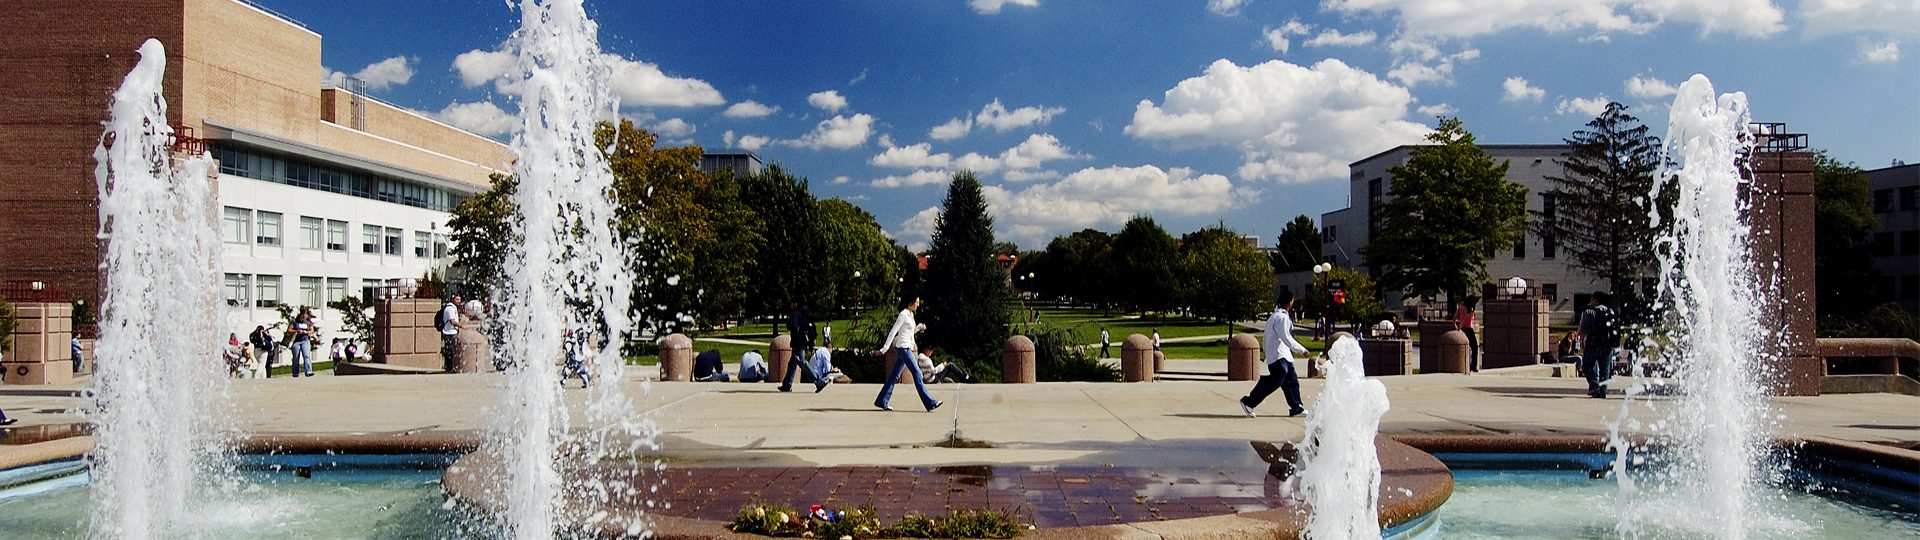 People walking by the fountain near Benjamin Rosenthal Library.